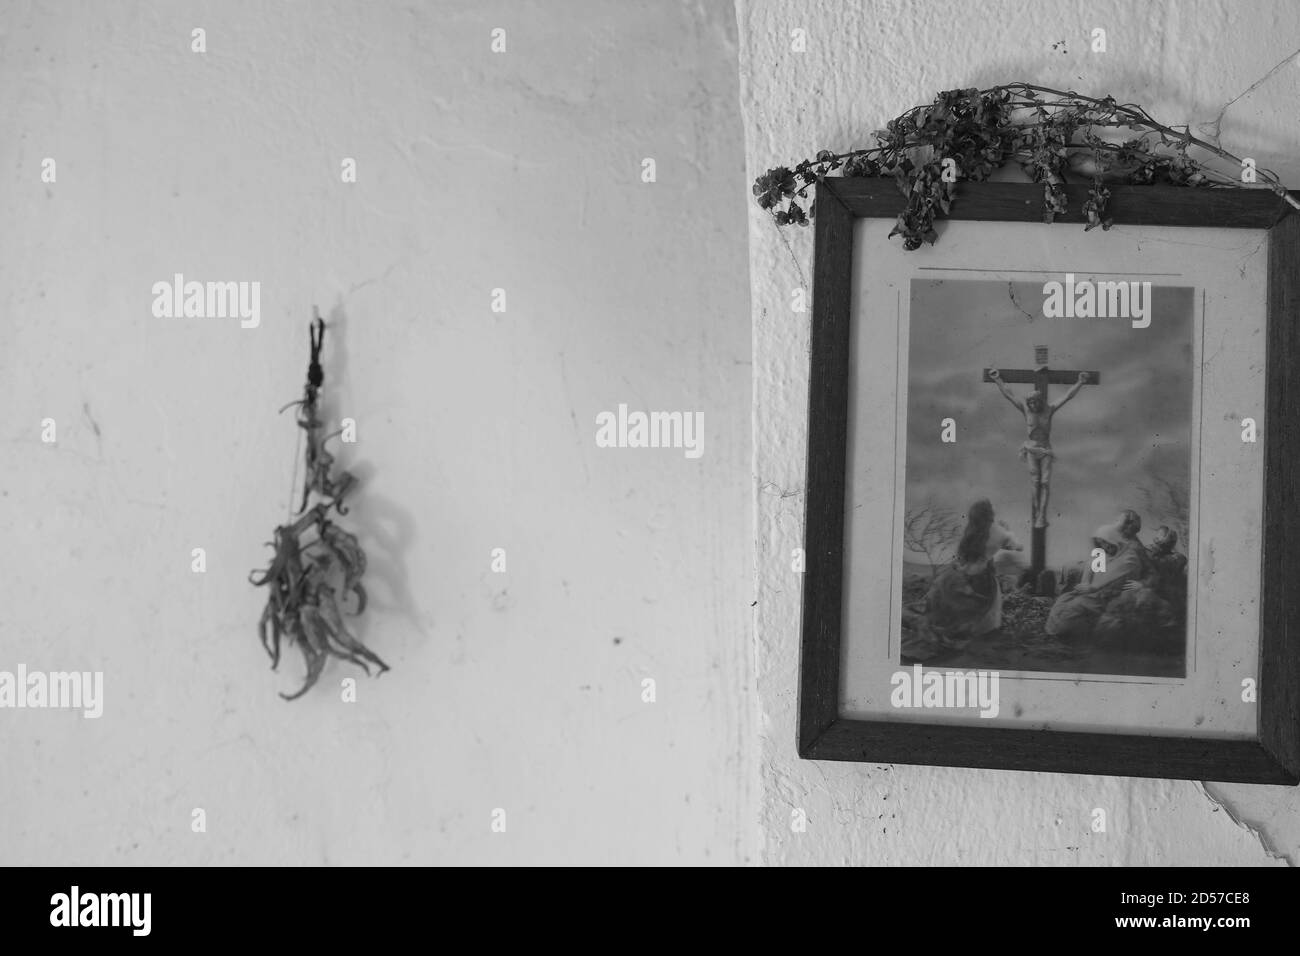 Athens, Greece - September 12, 2020: Desiccated flowers on vintage framed picture with depiction of the crucifixion of Jesus and dried herbs hanging o Stock Photo